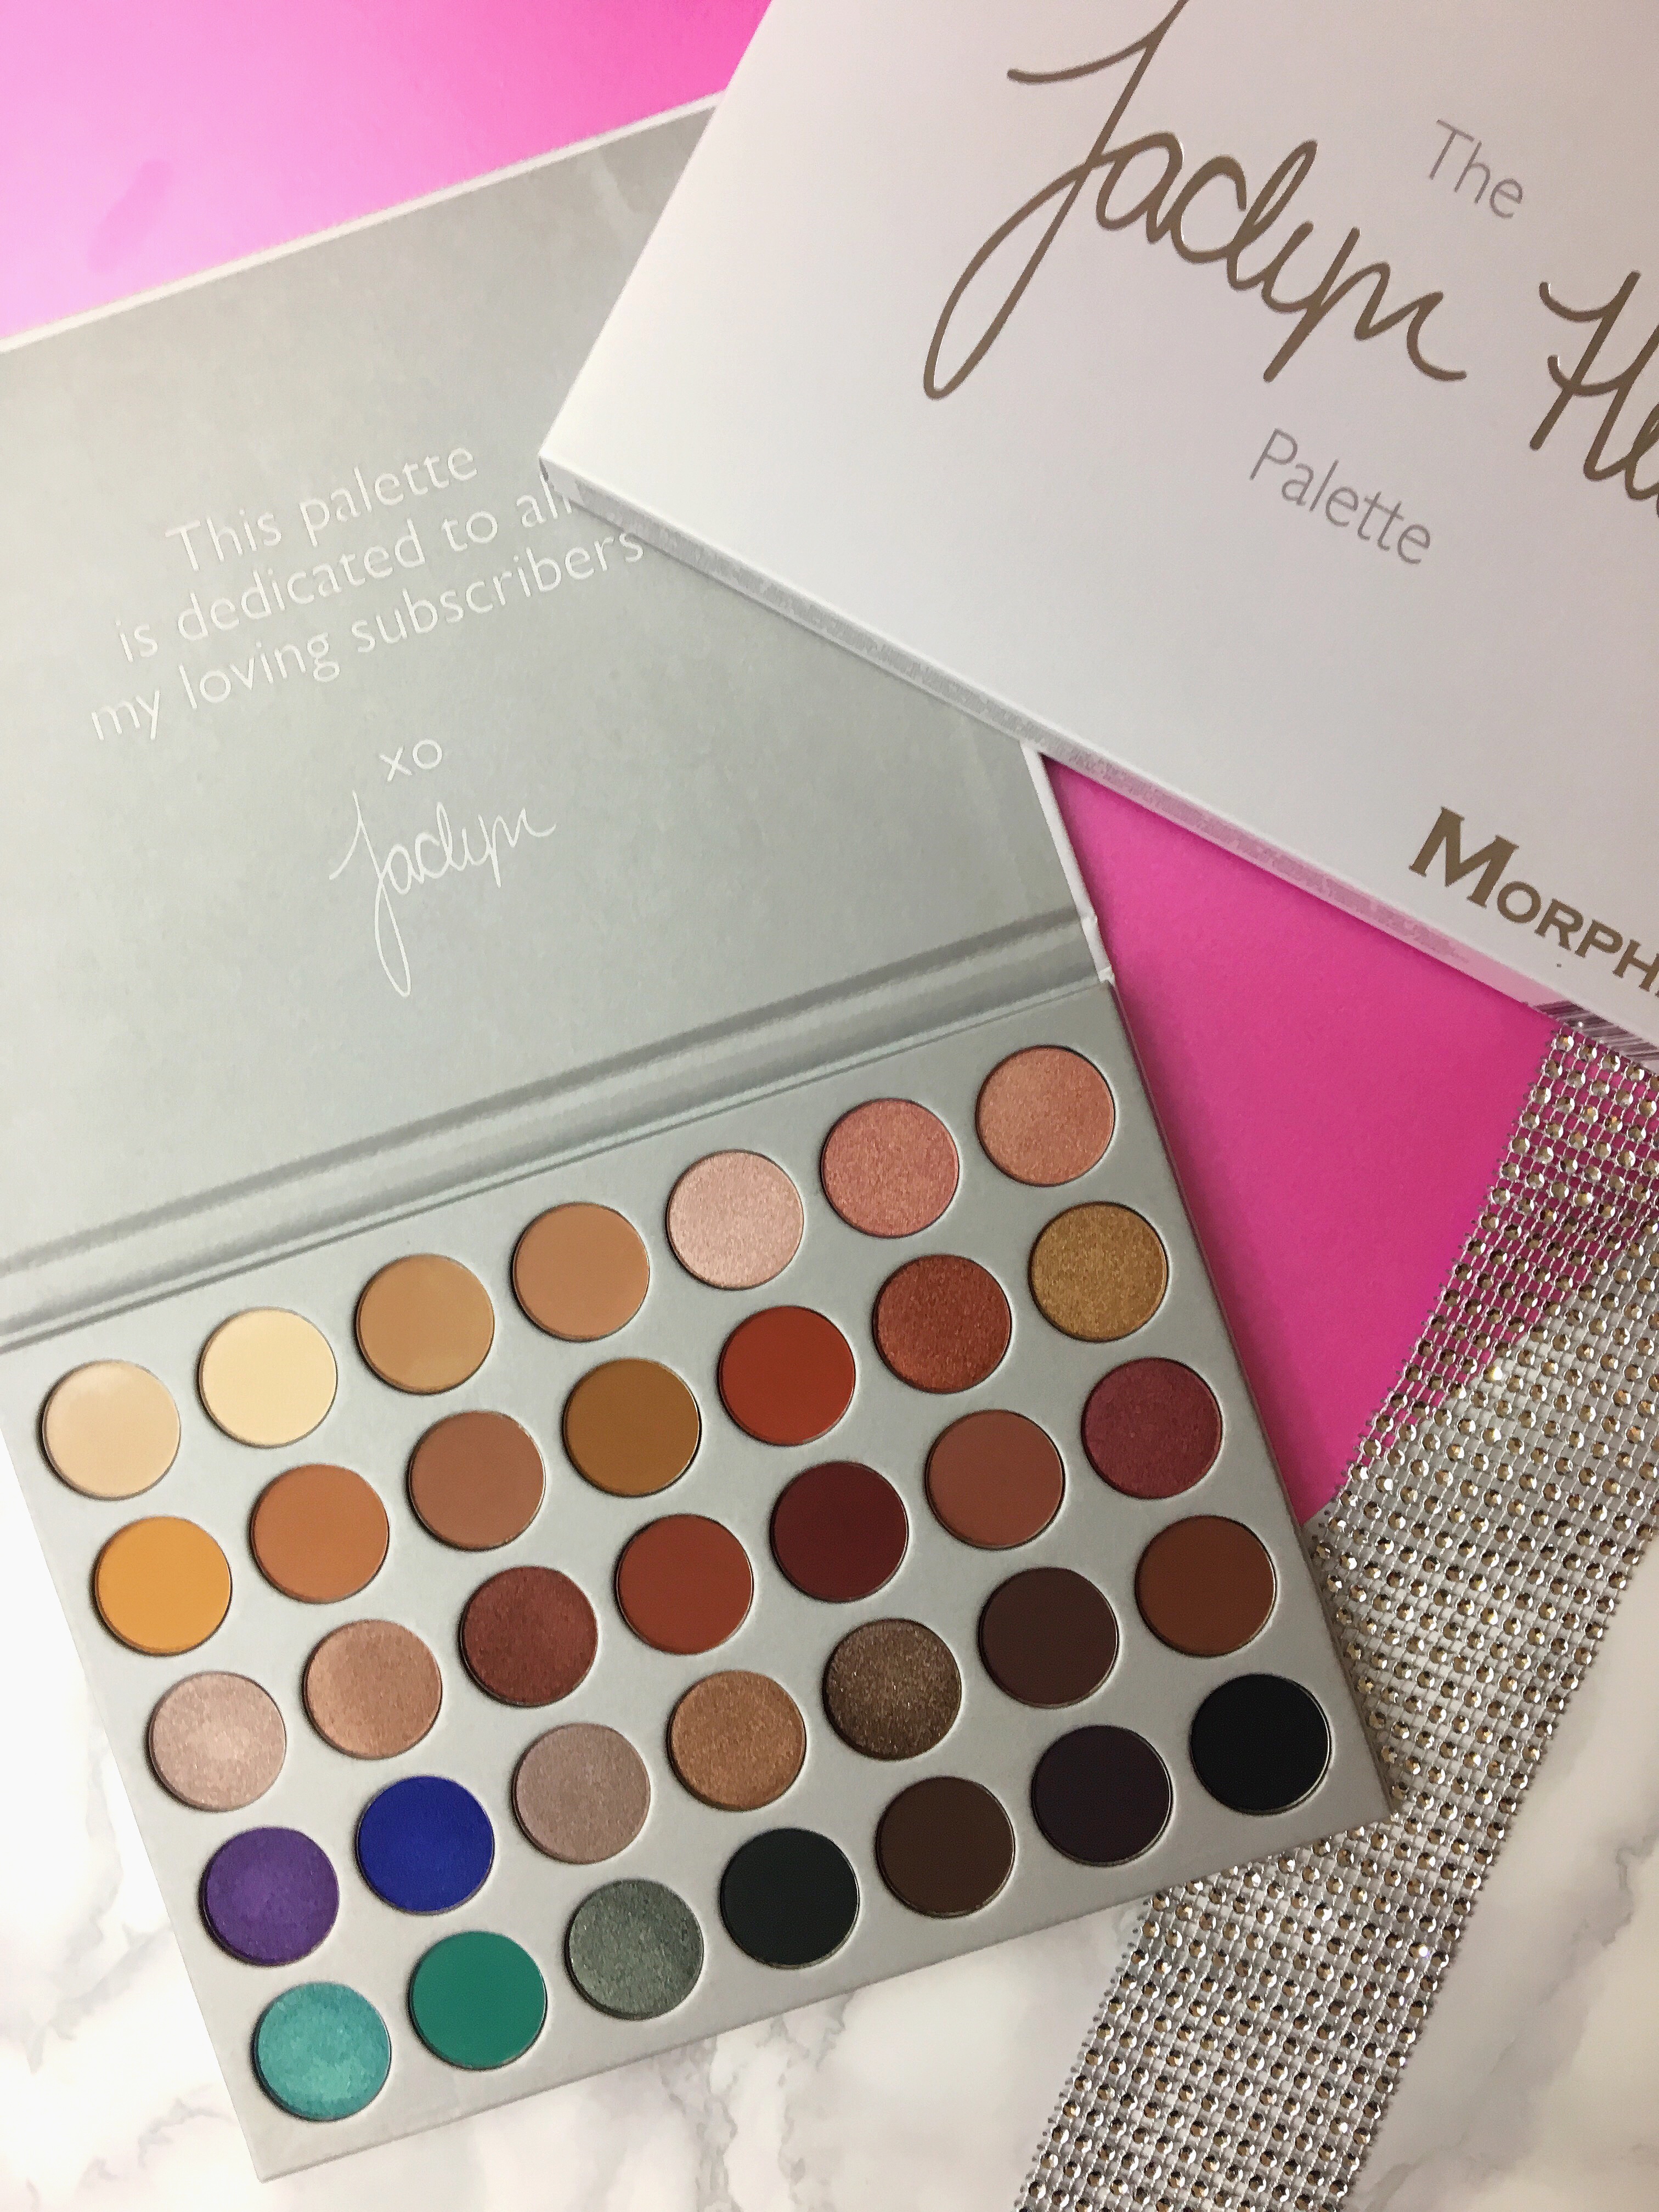 First Impressions Of The Morphe X Jaclyn Hill Palette